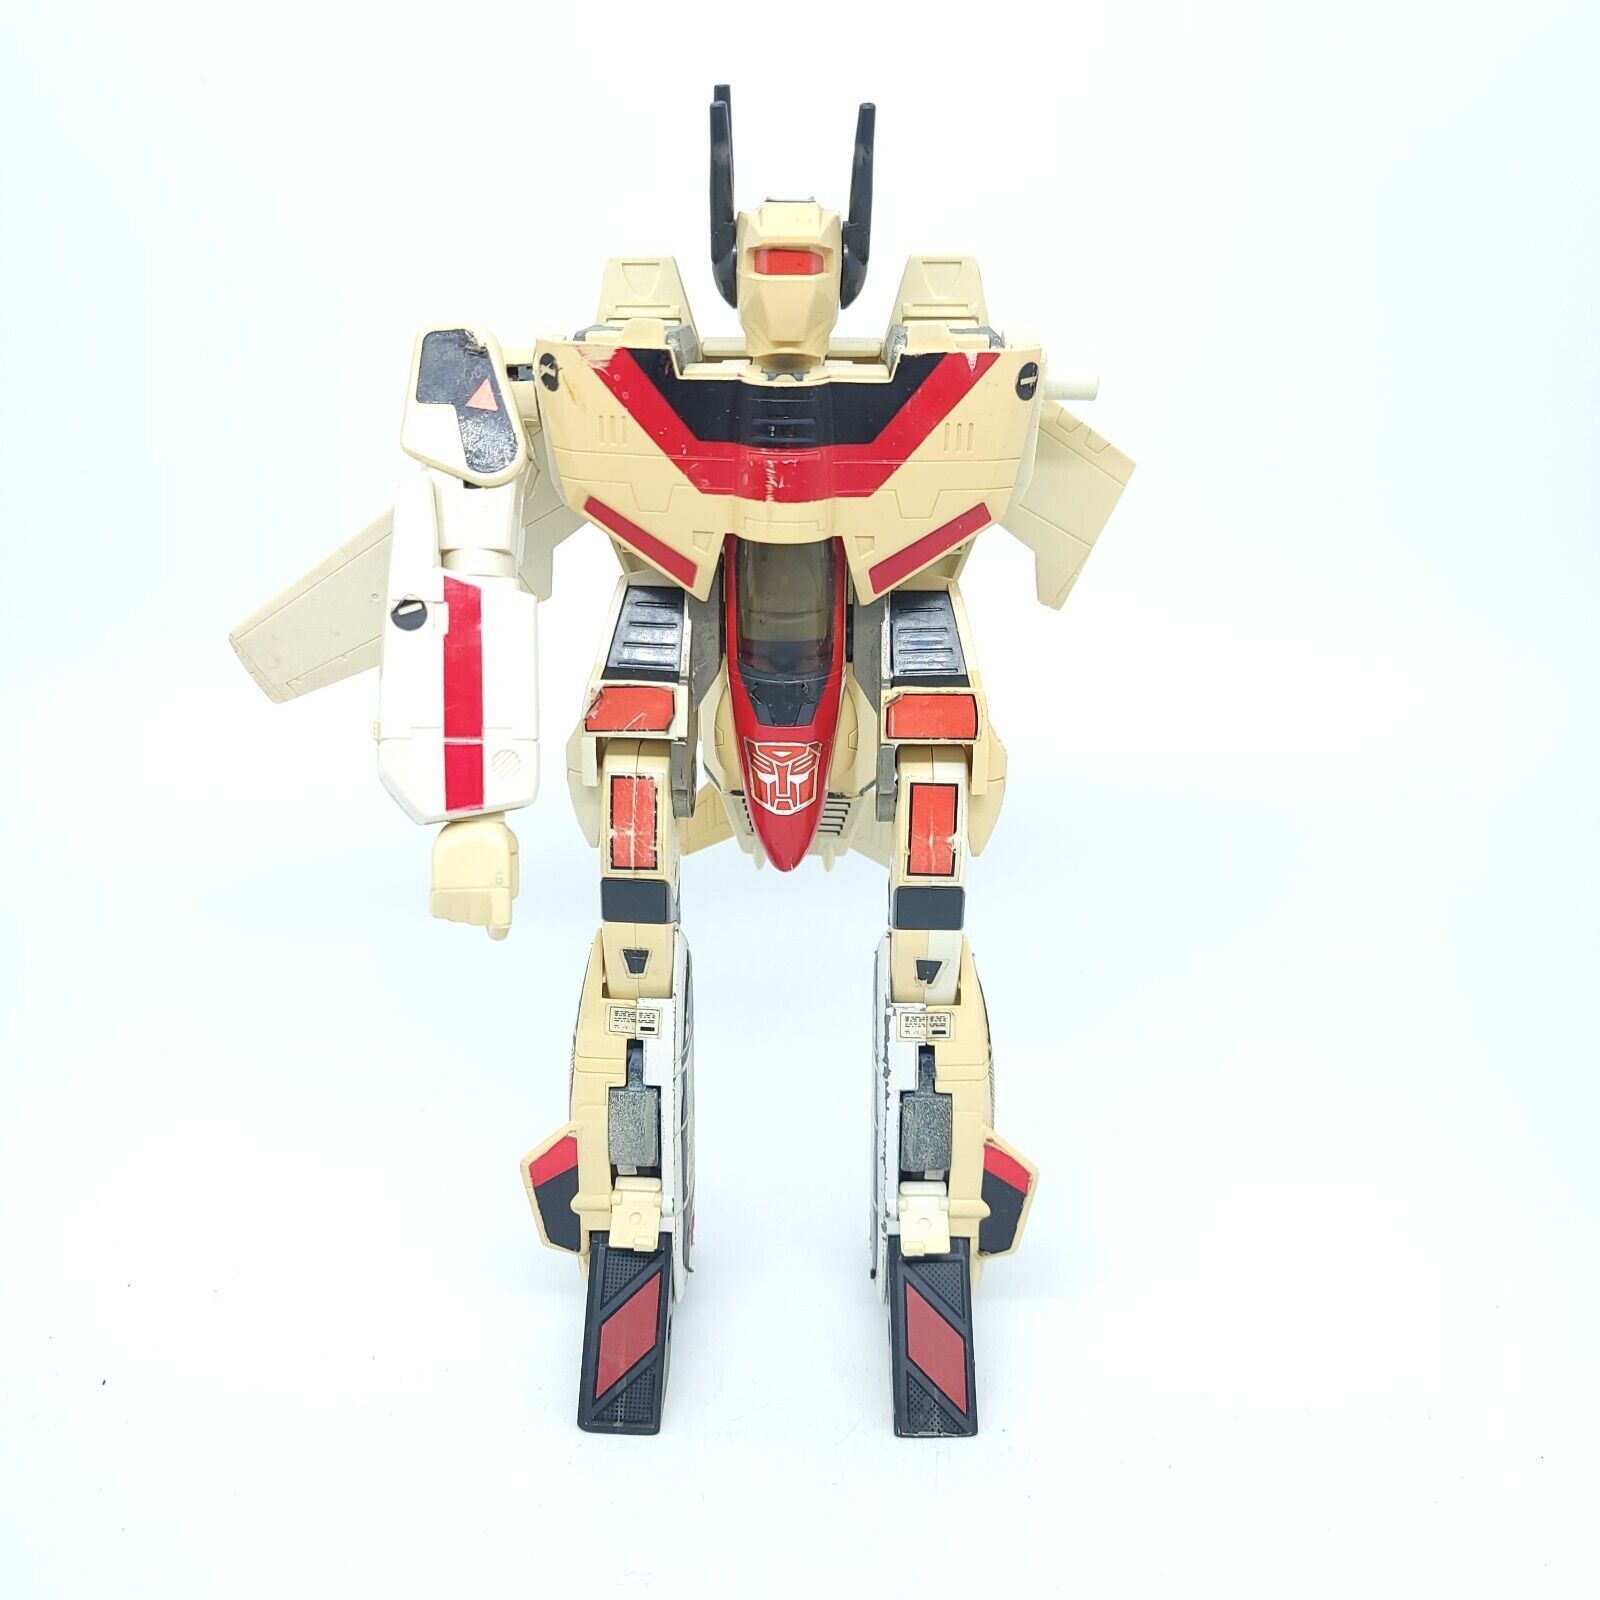 Jetfire Transformers G1 Bandai Vintage 1985 Incomplete, for parts or repair